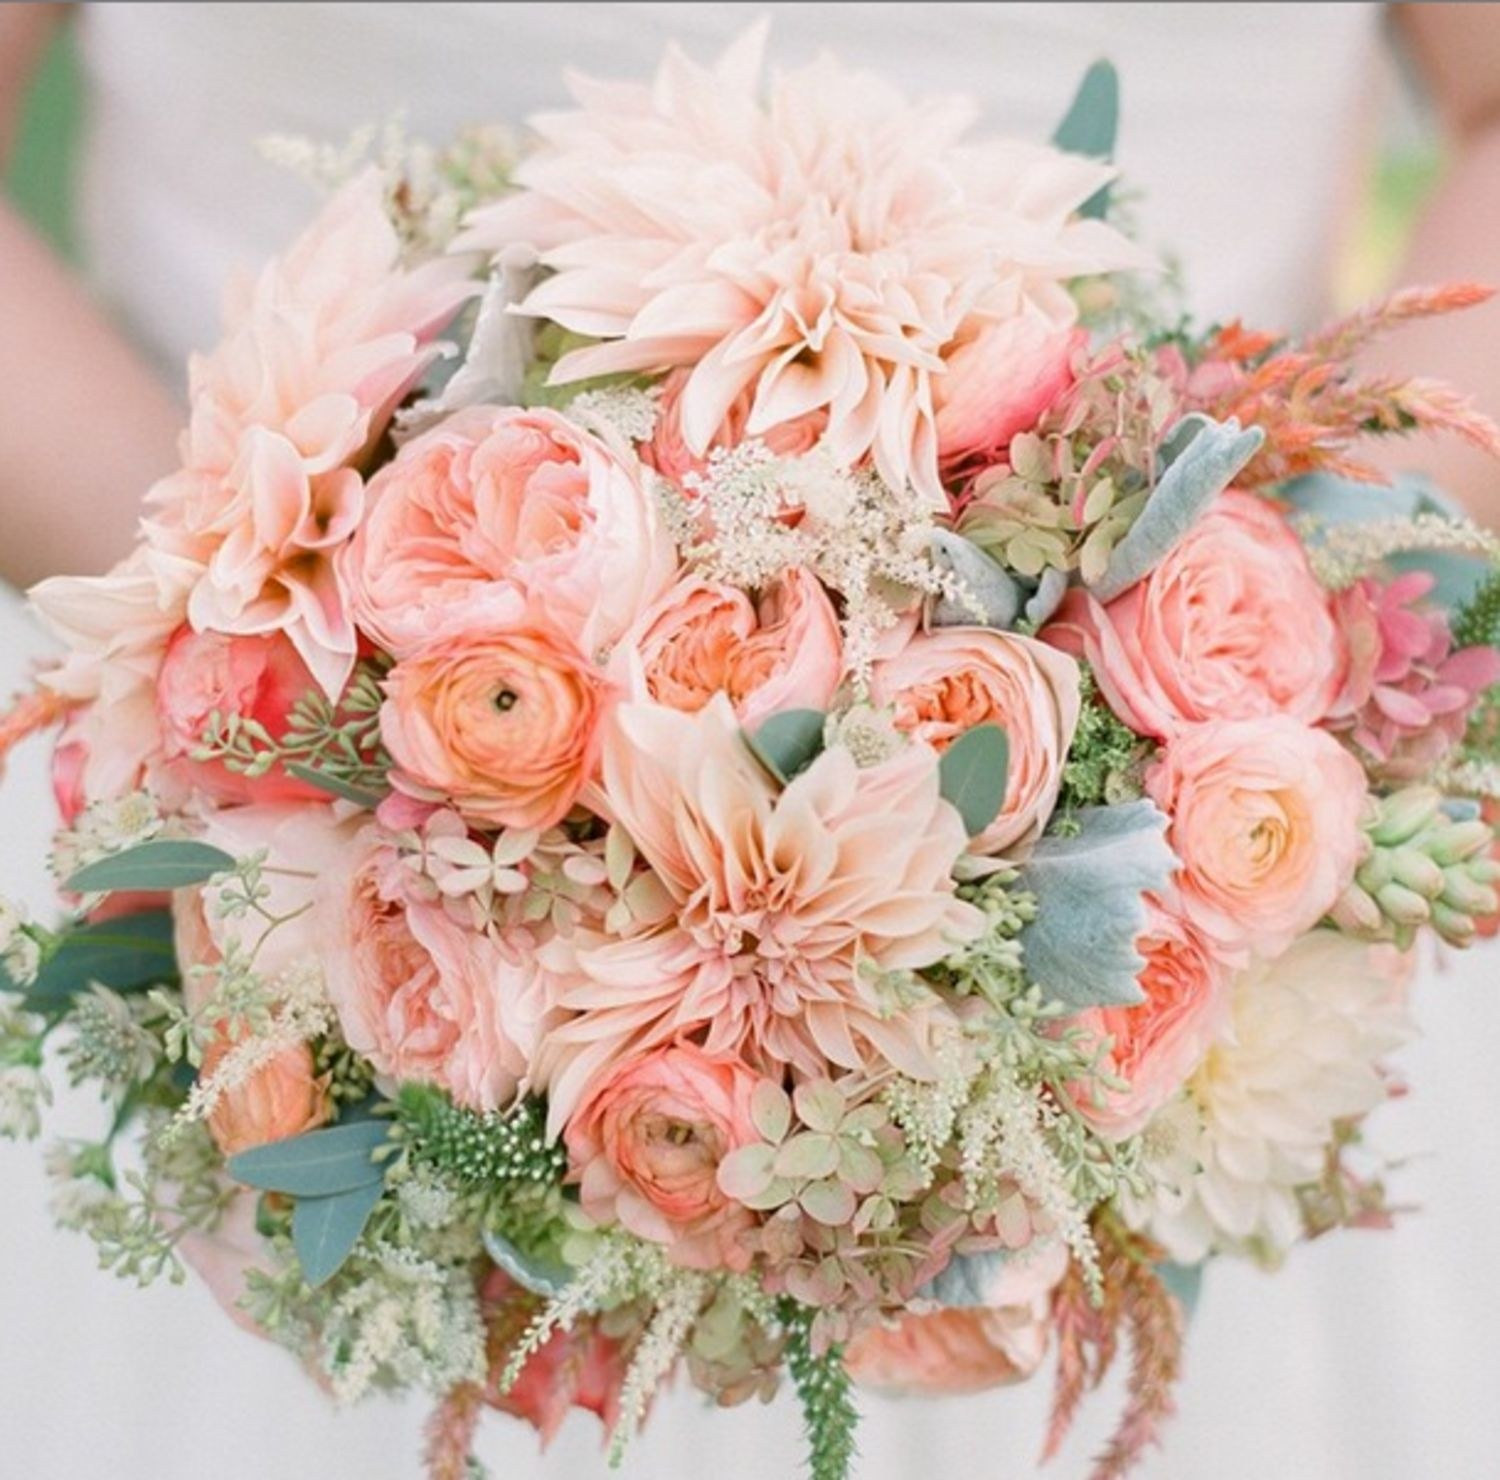 Flower For Wedding
 Best Wedding Flowers 13 Gorgeous Bridal Bouquets in Every